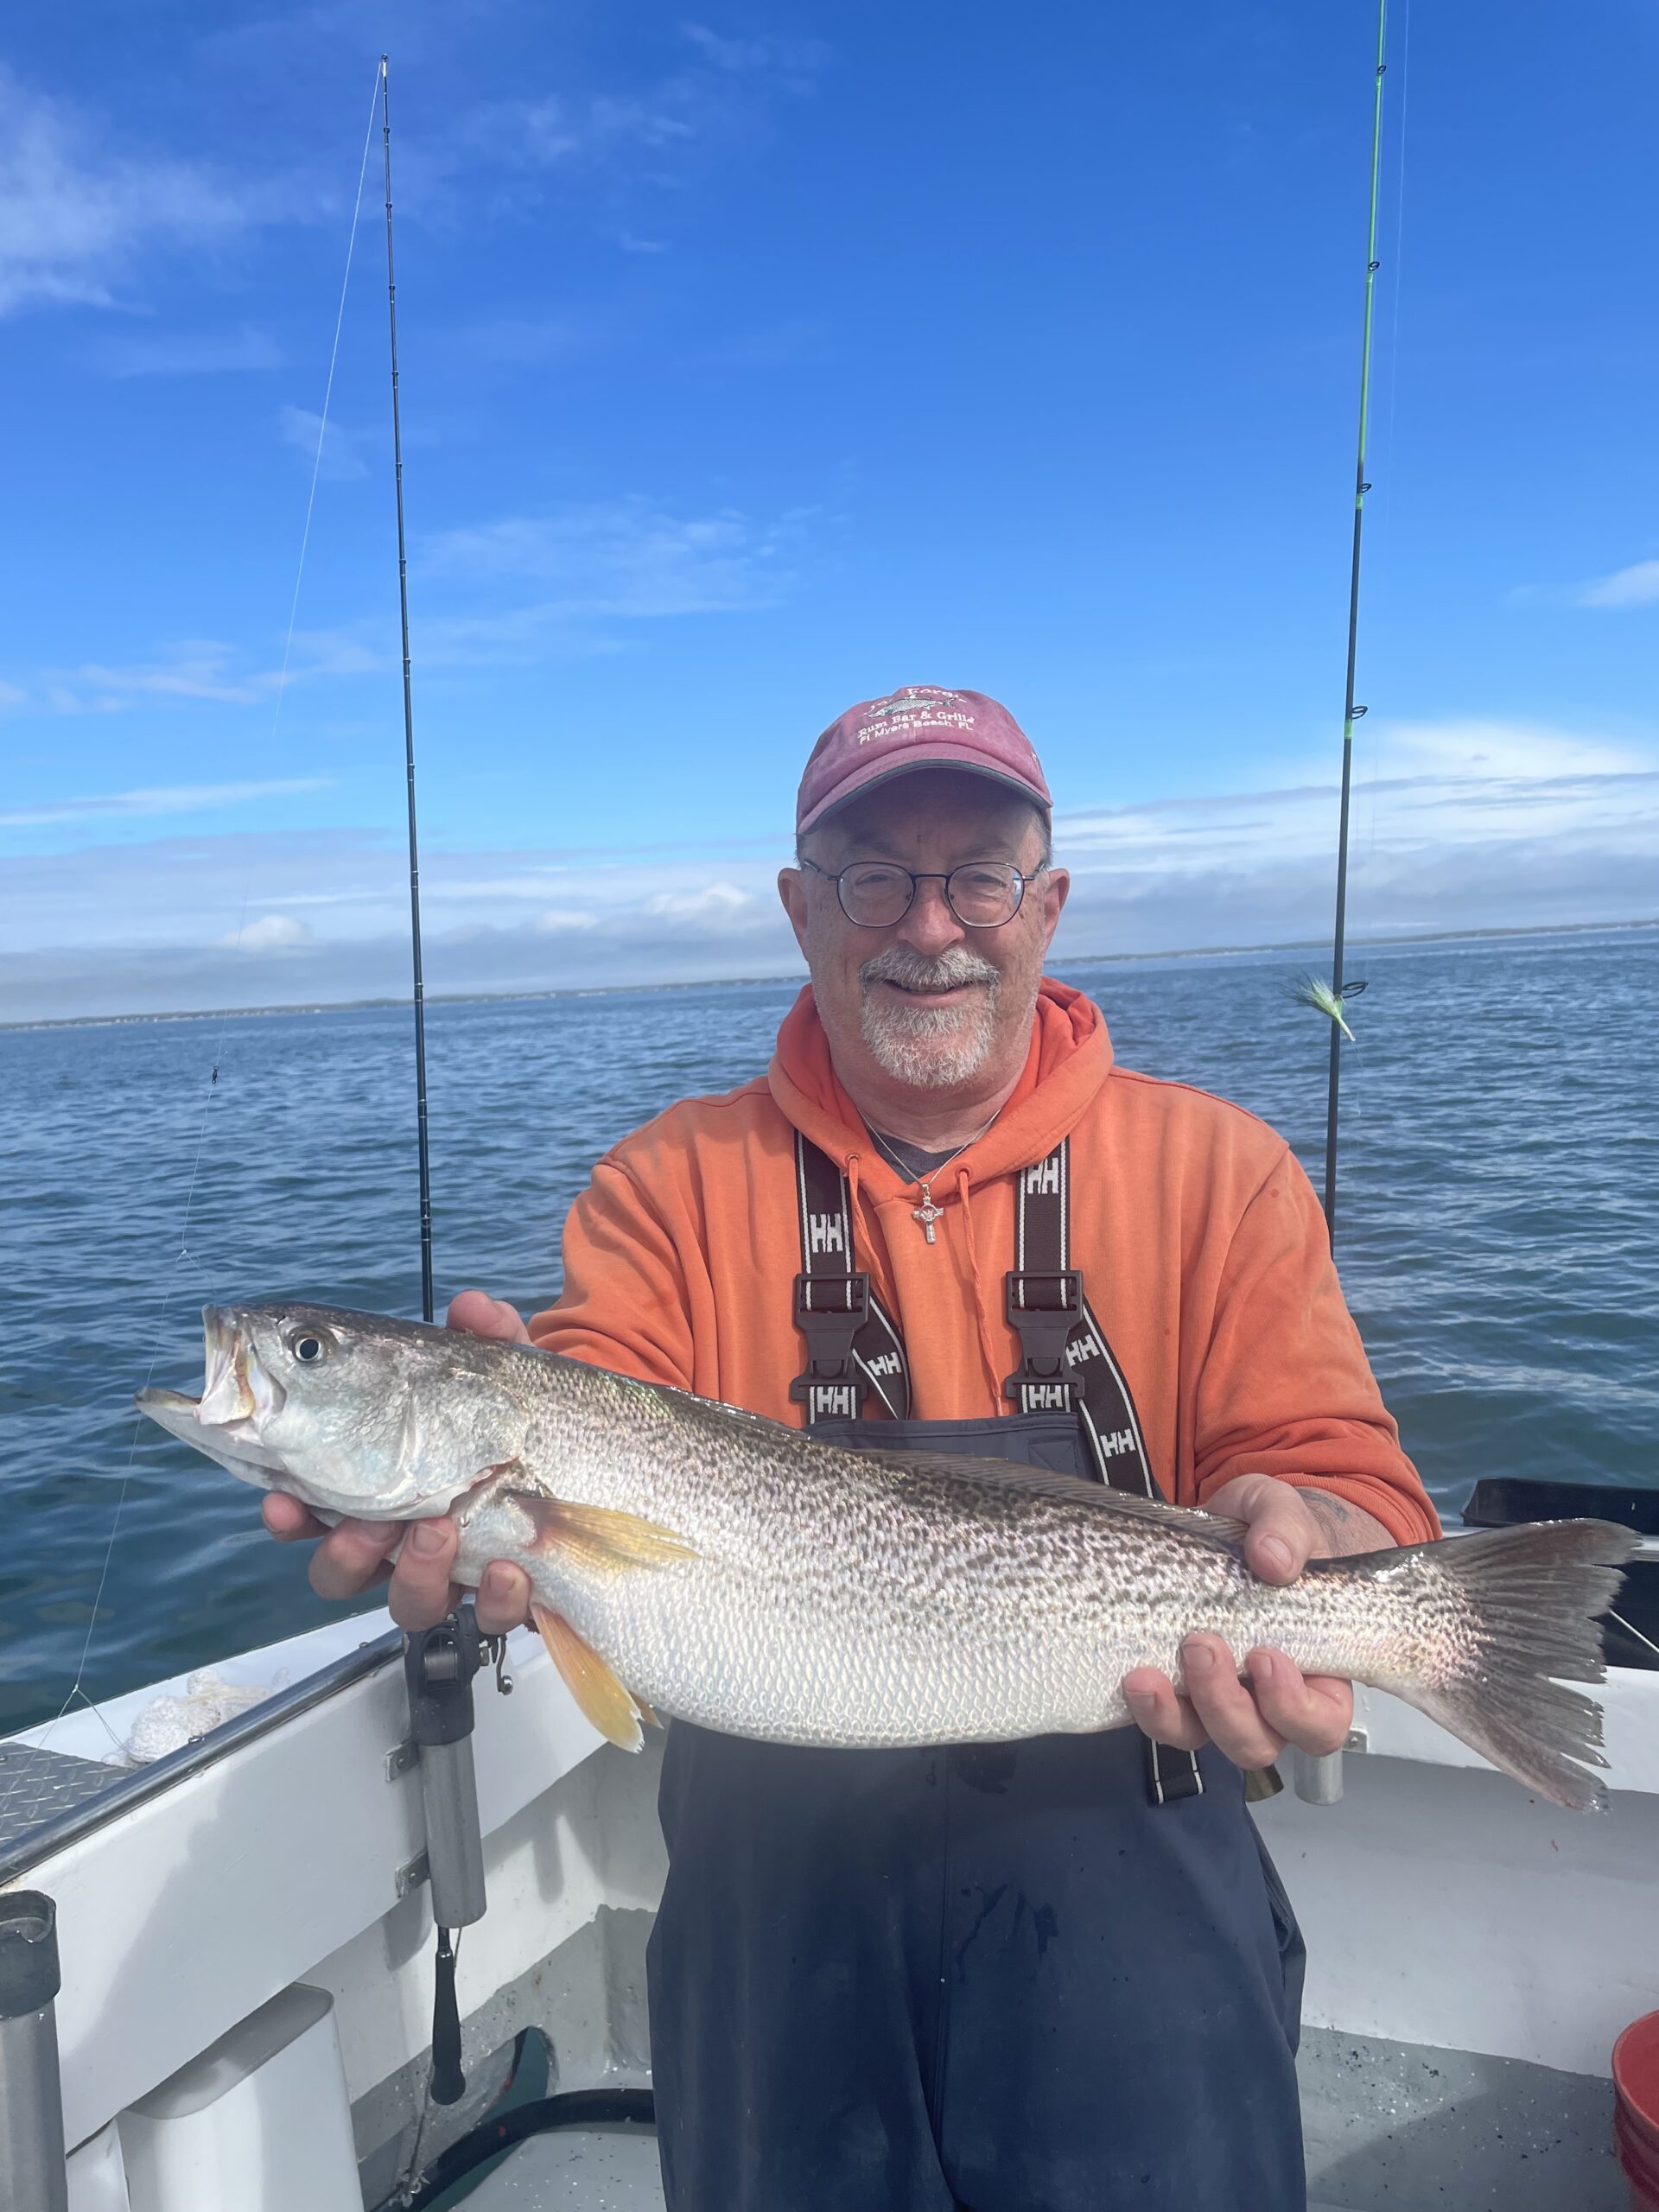 Tom Cole with a nice Peconic Bay weakfish caught aboard the Shinnecock Star.